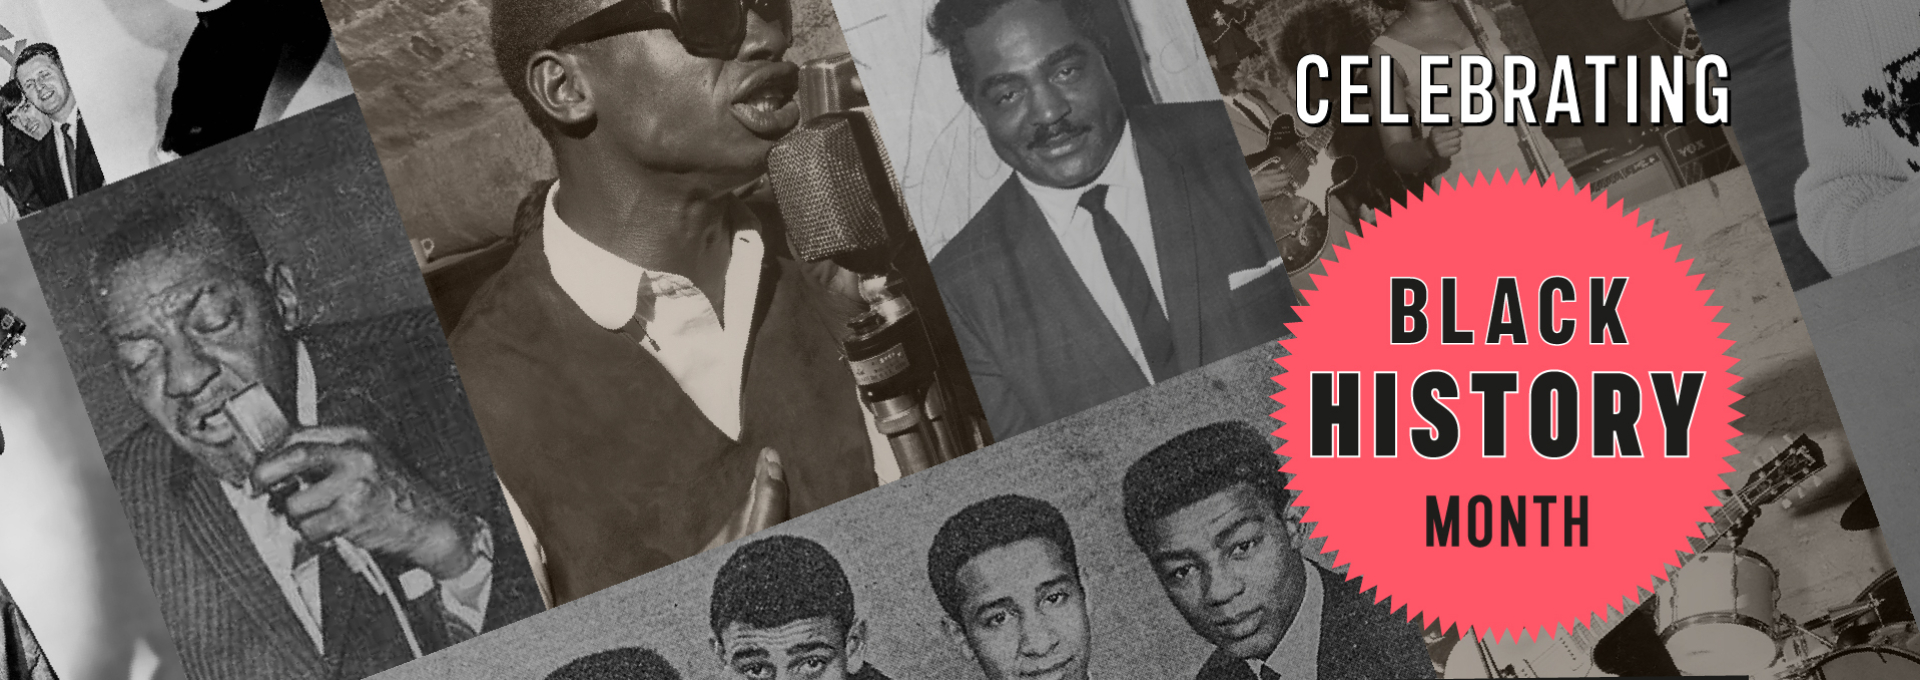 Black History Month celebrations at The Beatles Story with stories from The Cavern history